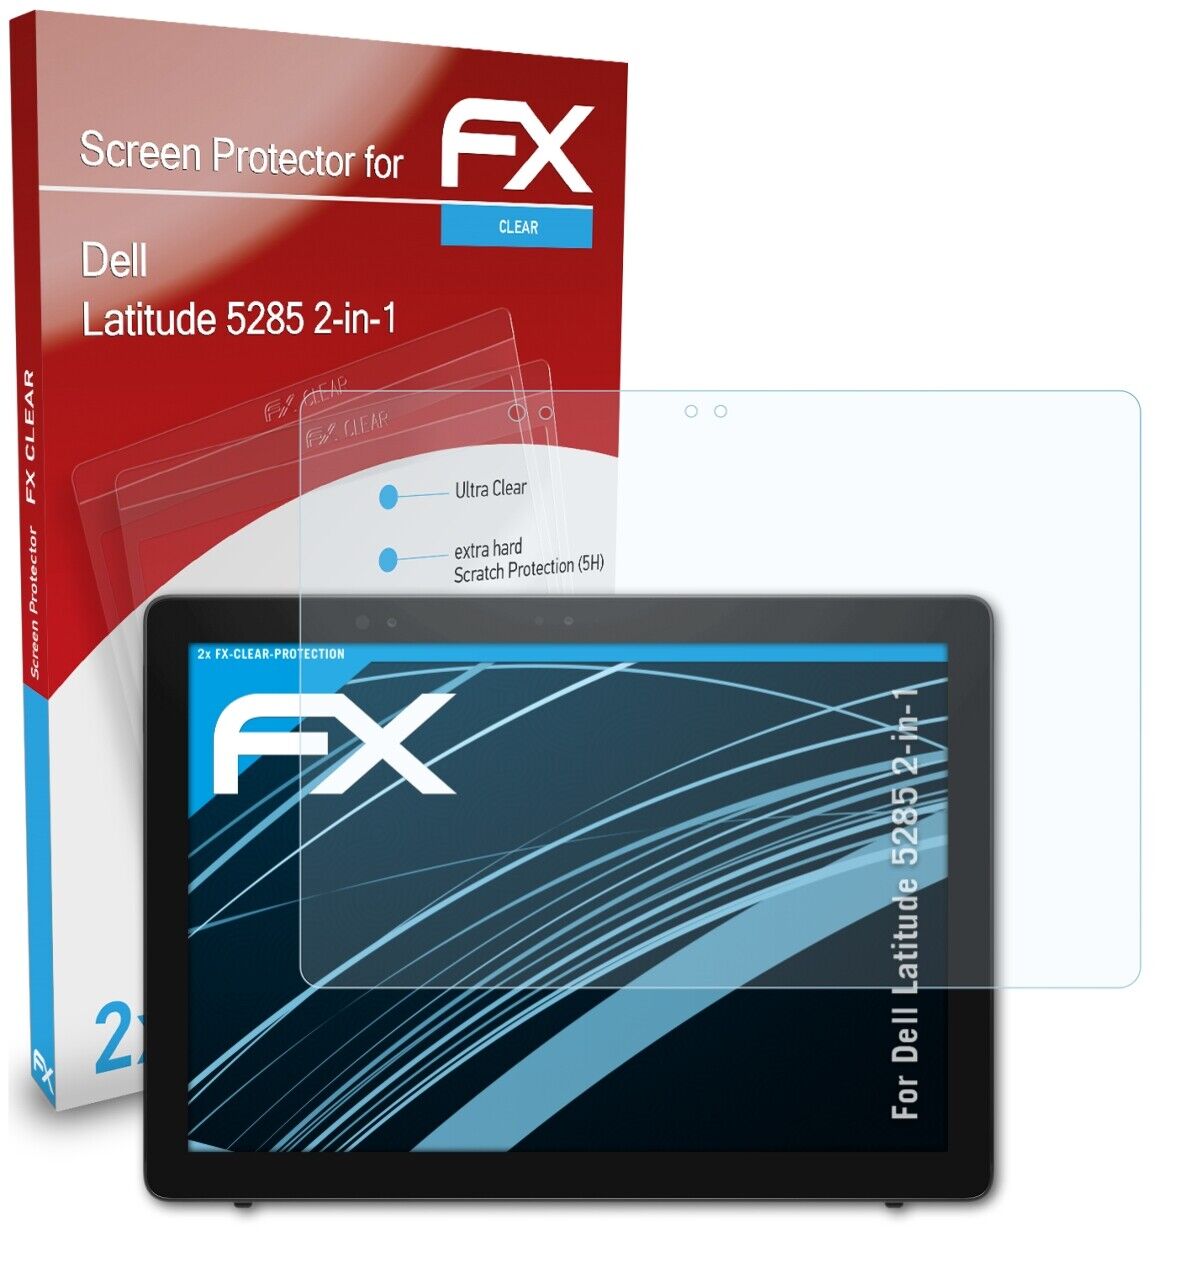 atFoliX 2x Screen Protector for Dell Latitude 5285 2-in-1 clear